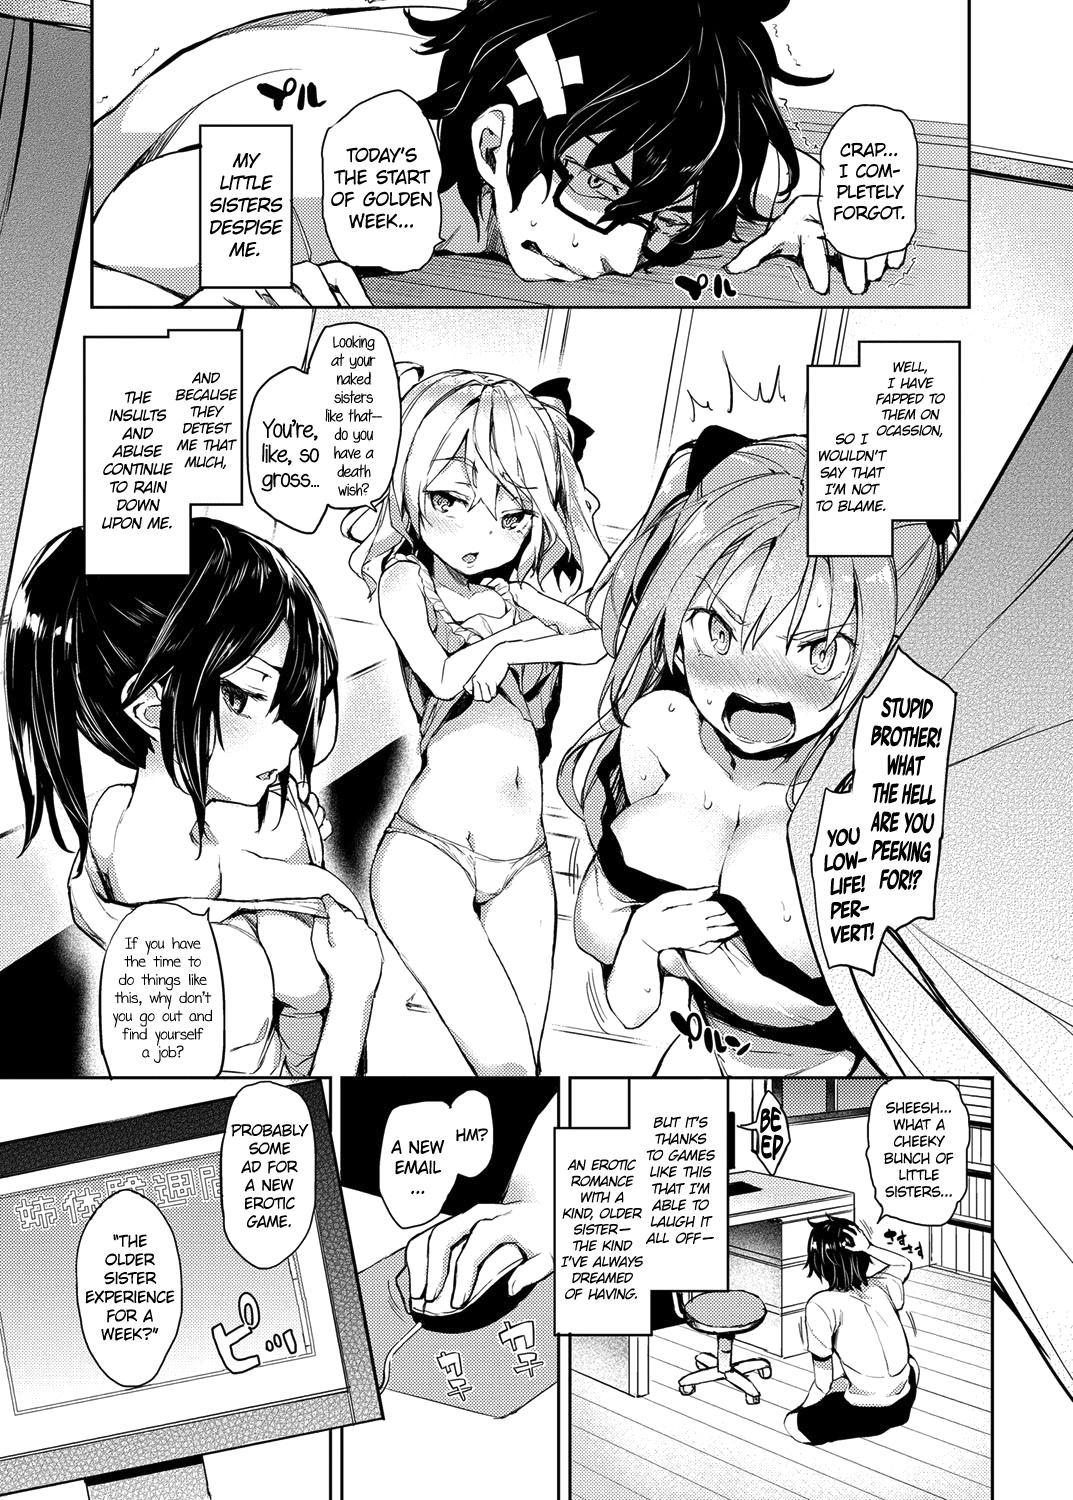 Ane Taiken Shuukan | The Older Sister Experience for a Week Ch. 1-3 3